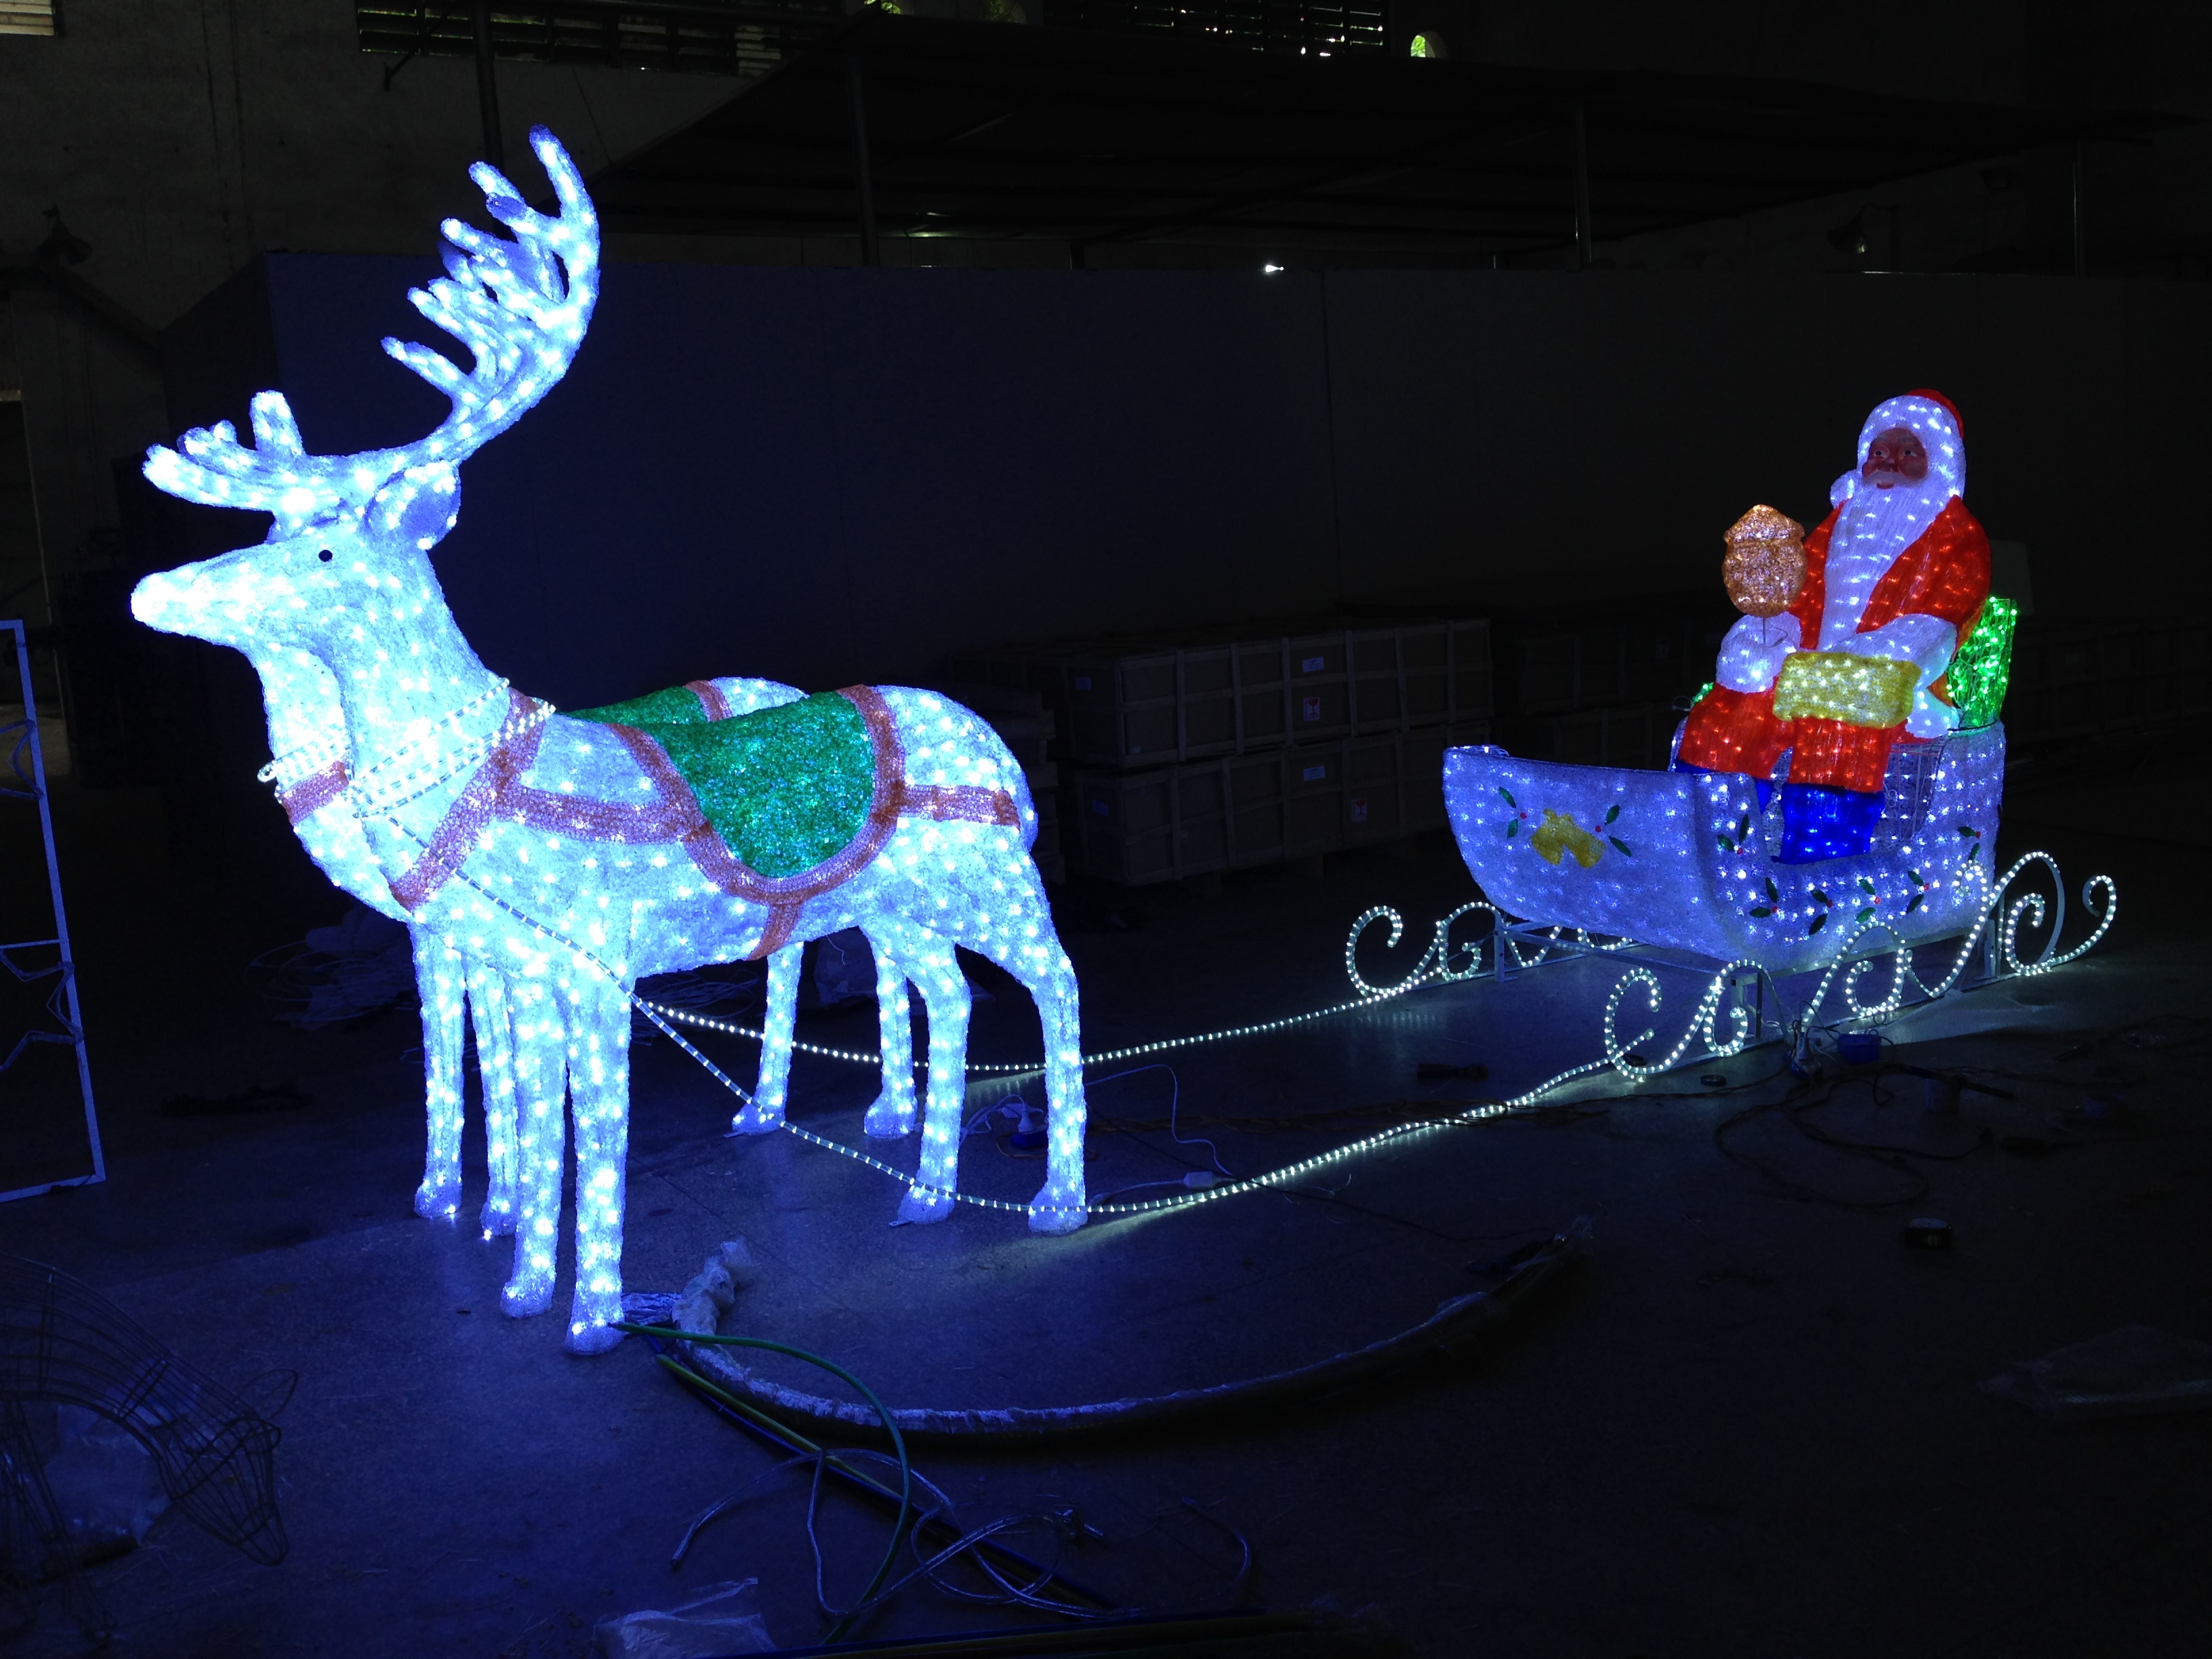 Sultable for indoor and outdoor of holiday festival and Christmas decoration